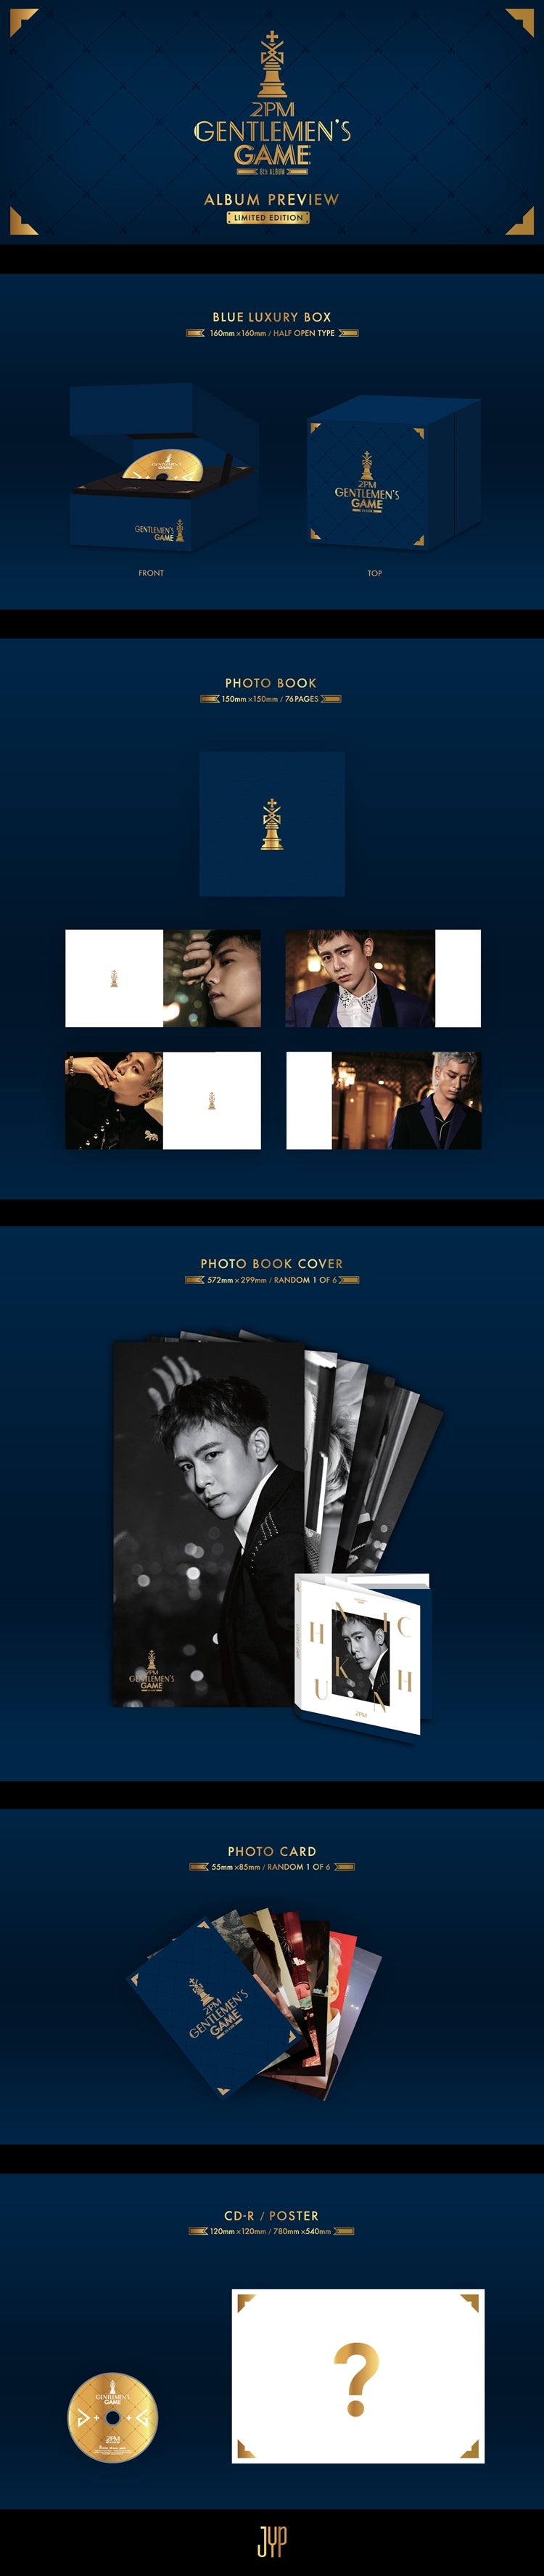 1 CD
1 Photo Book (76 pages)
1 Photo Card
1 Photo Book